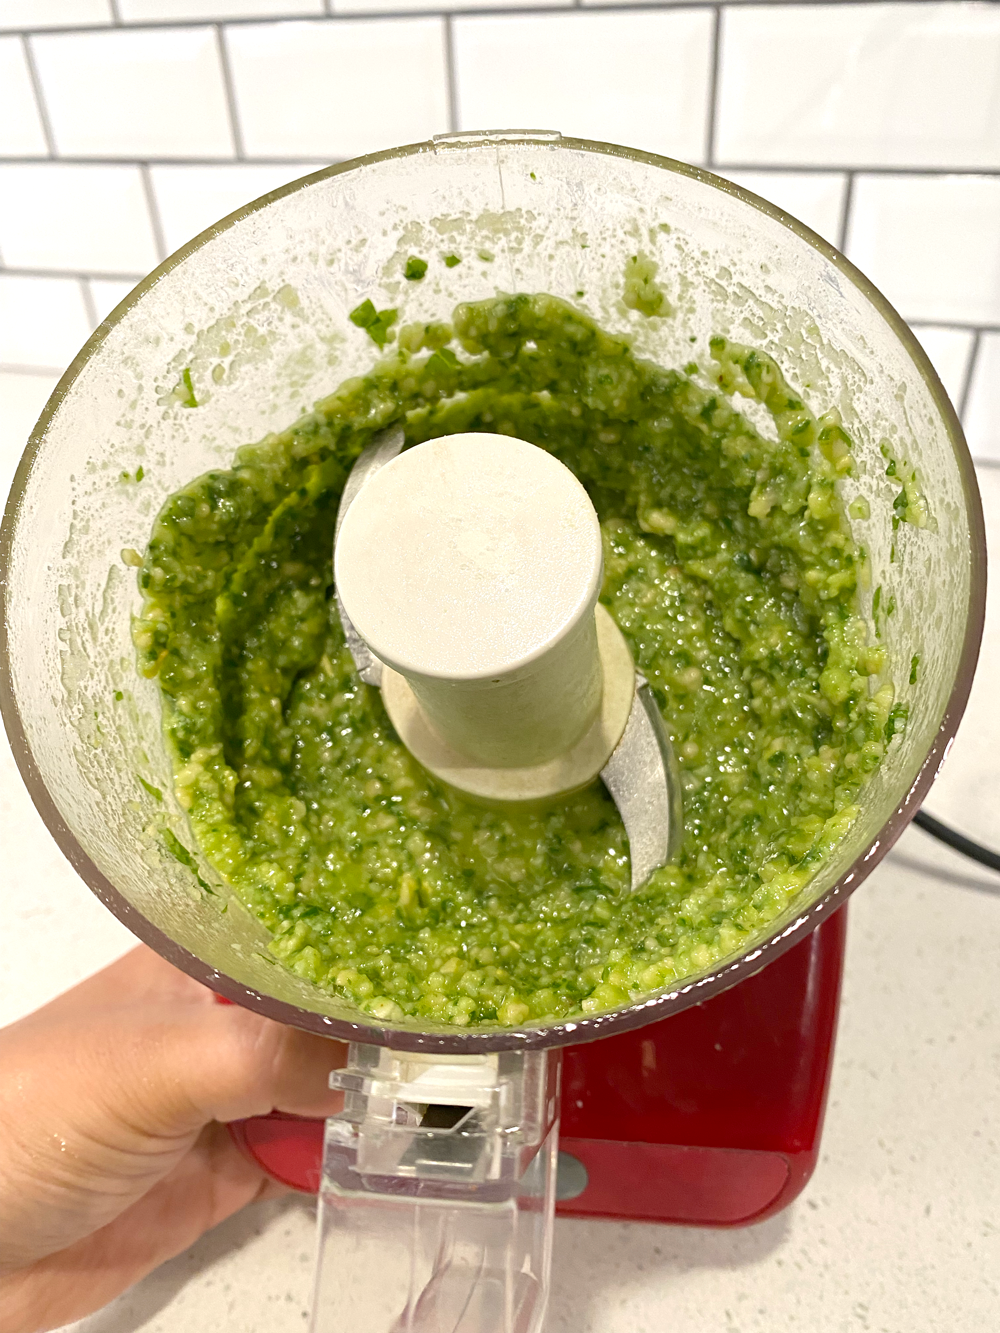 Image of my pesto, which is nicely blended to a cream-like consistency